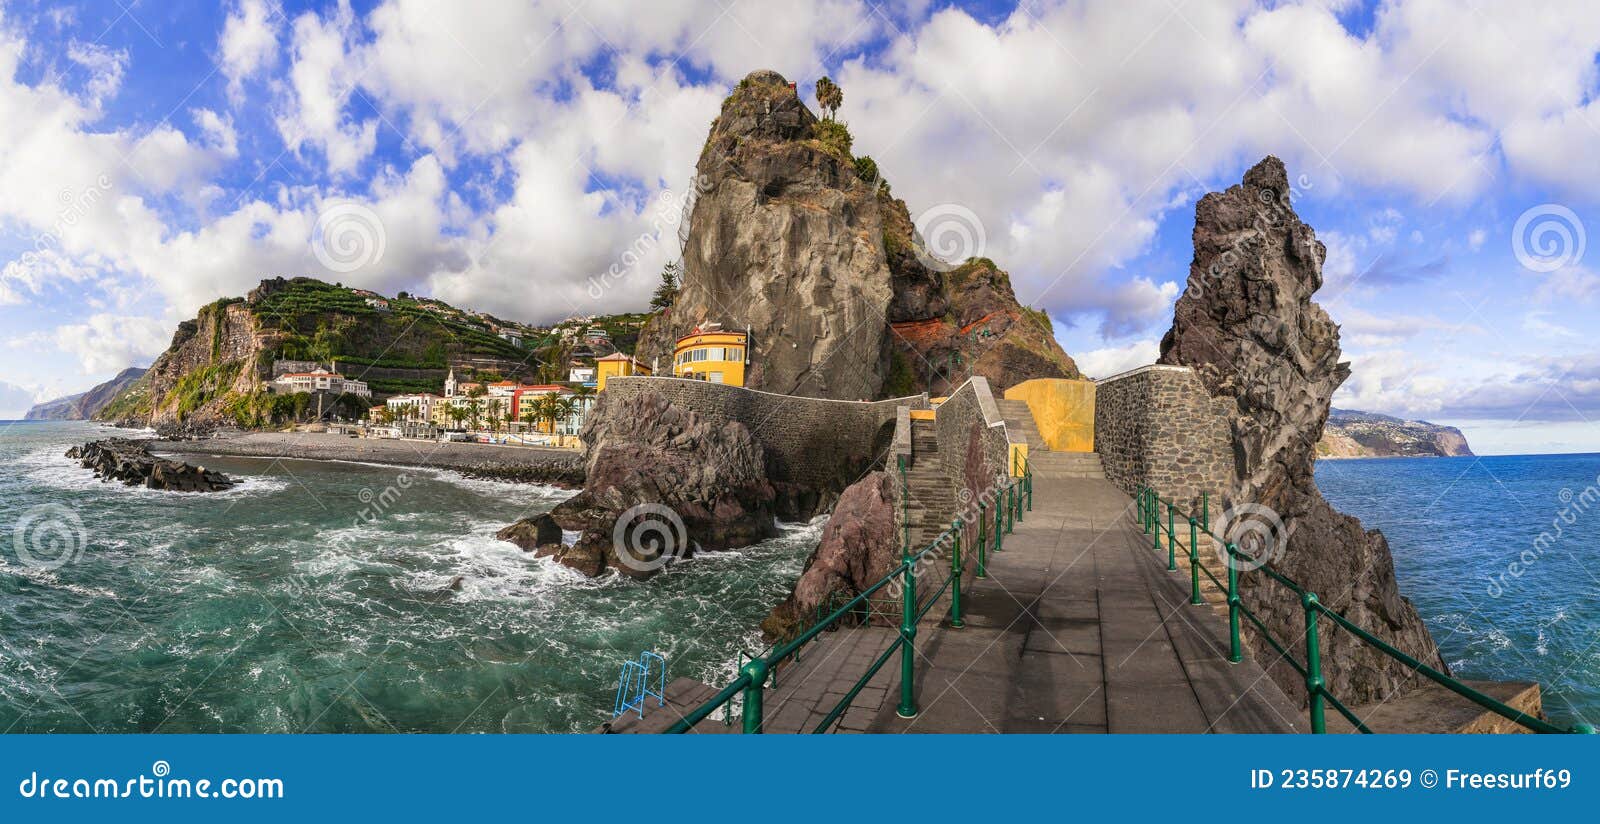 ponta do sol - scenic place in south of madeira island